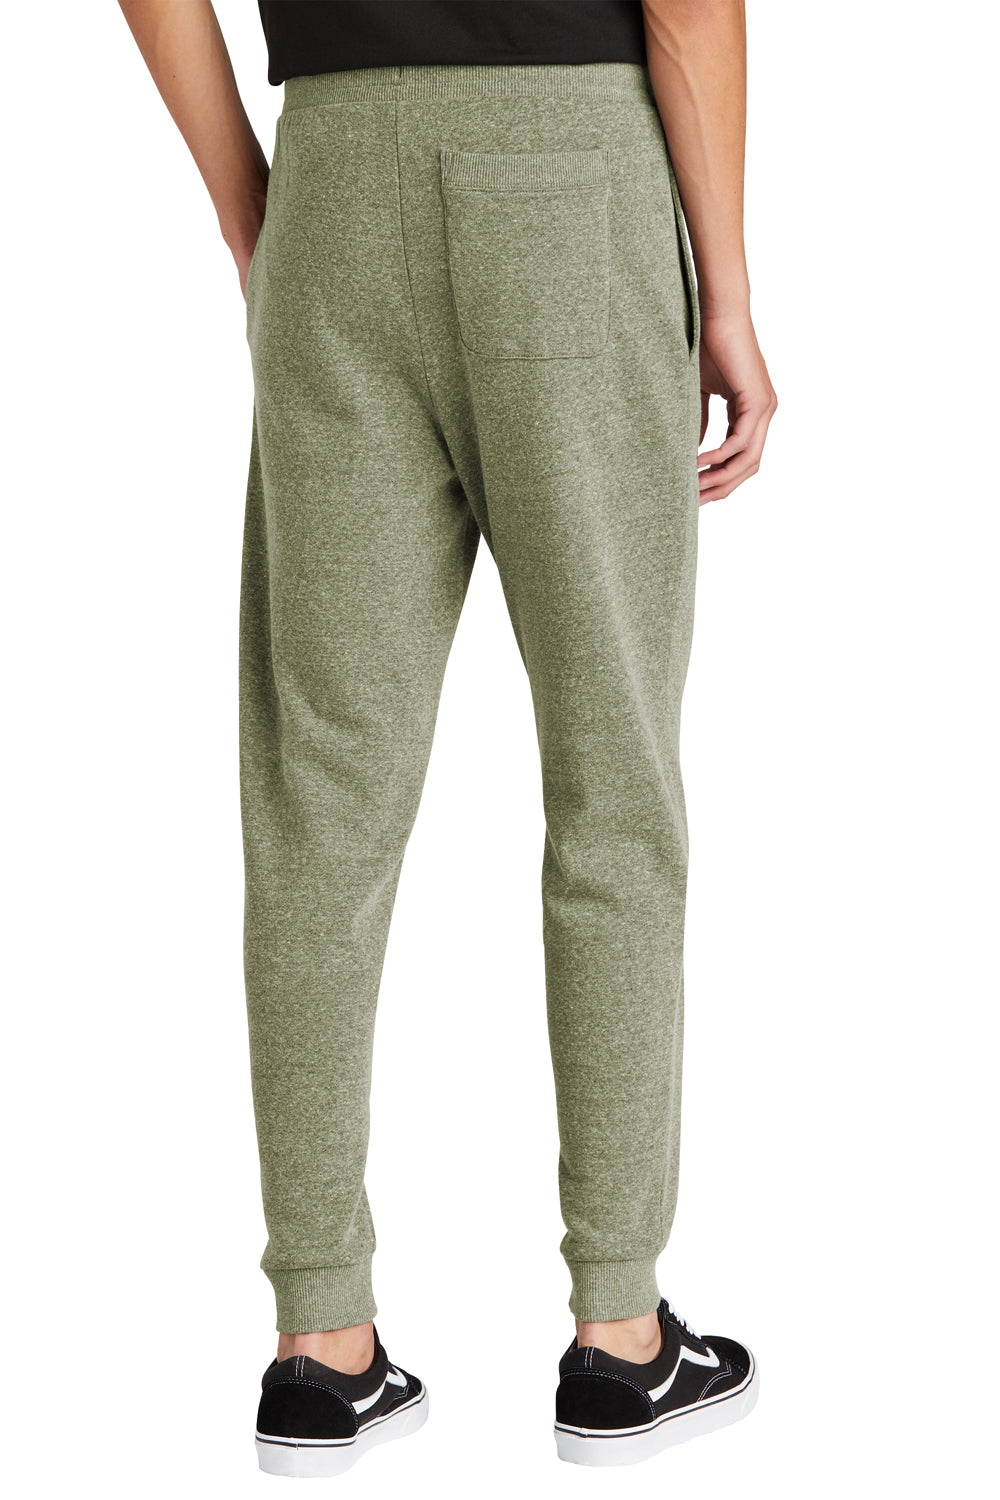 District DT1307 Mens Perfect Tri Fleece Jogger Sweatpants w/ Pockets Military Green Frost Back